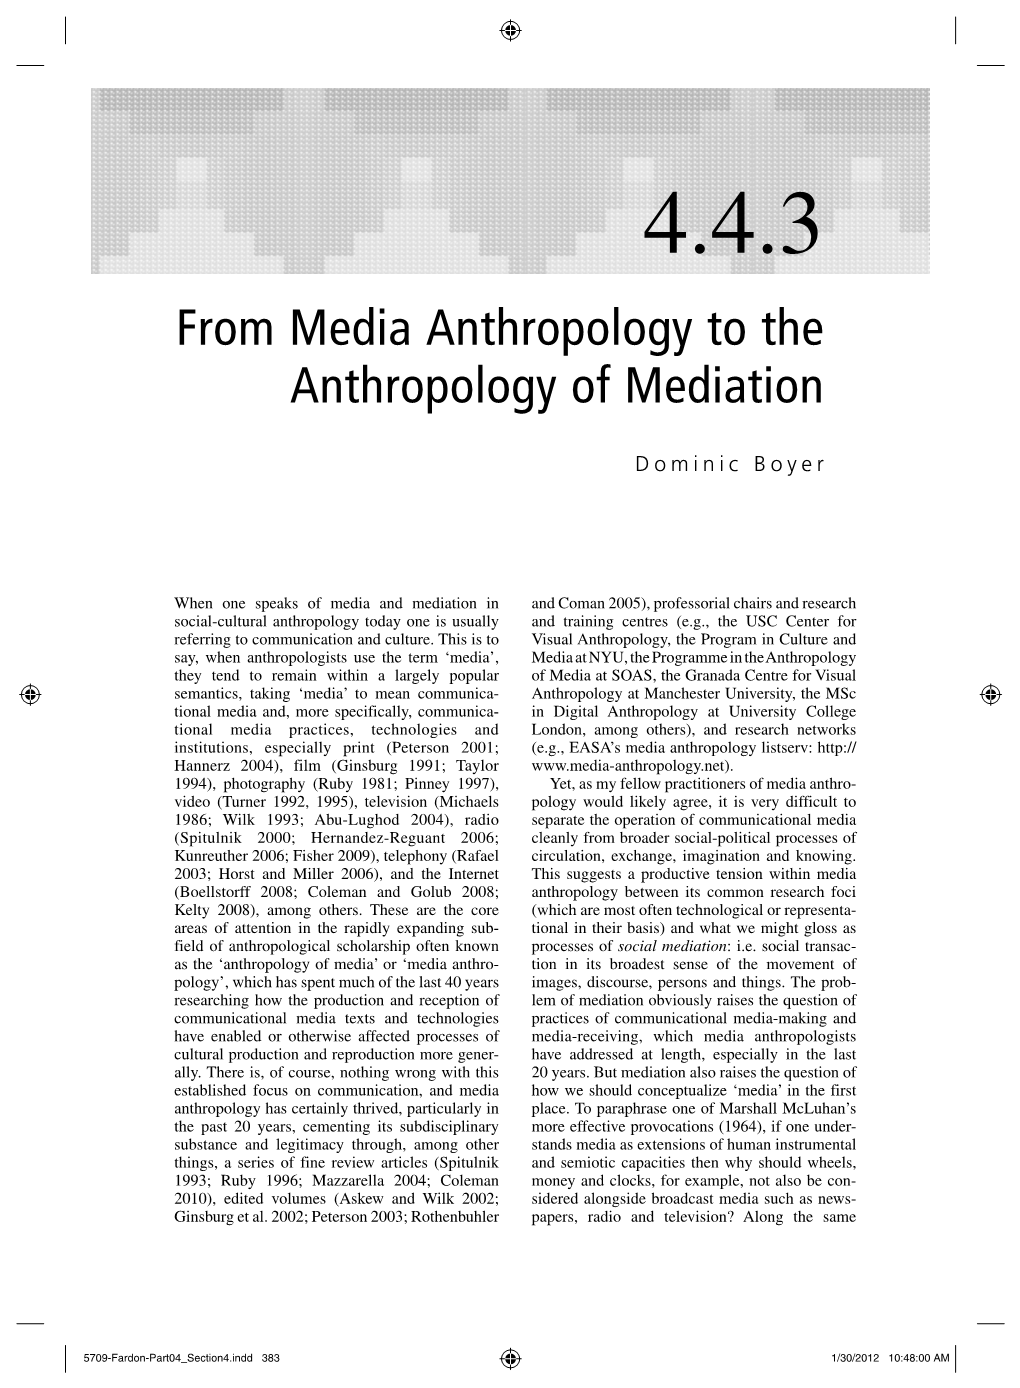 From Media Anthropology to the Anthropology of Mediation